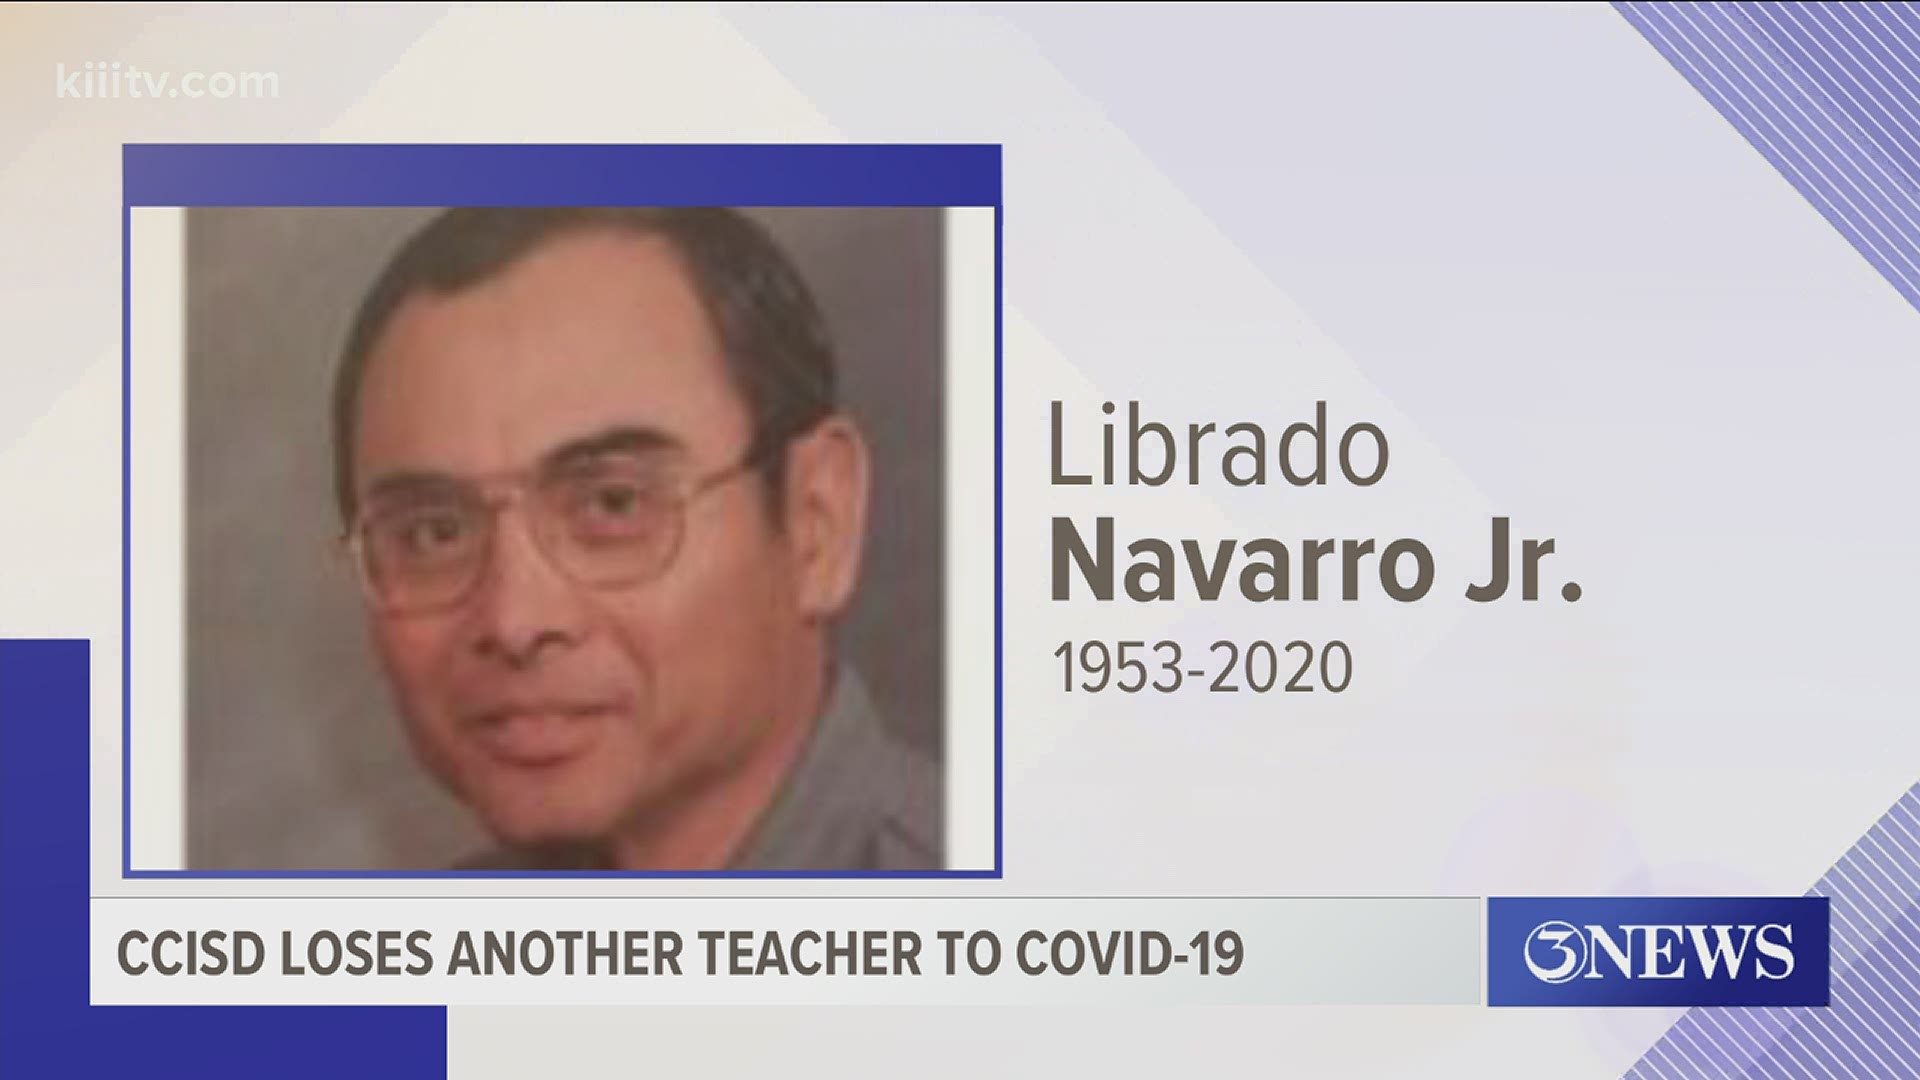 Services for Navarro will be held Tuesday, January 5, at the Garza Funeral Home Chapel in San Diego.